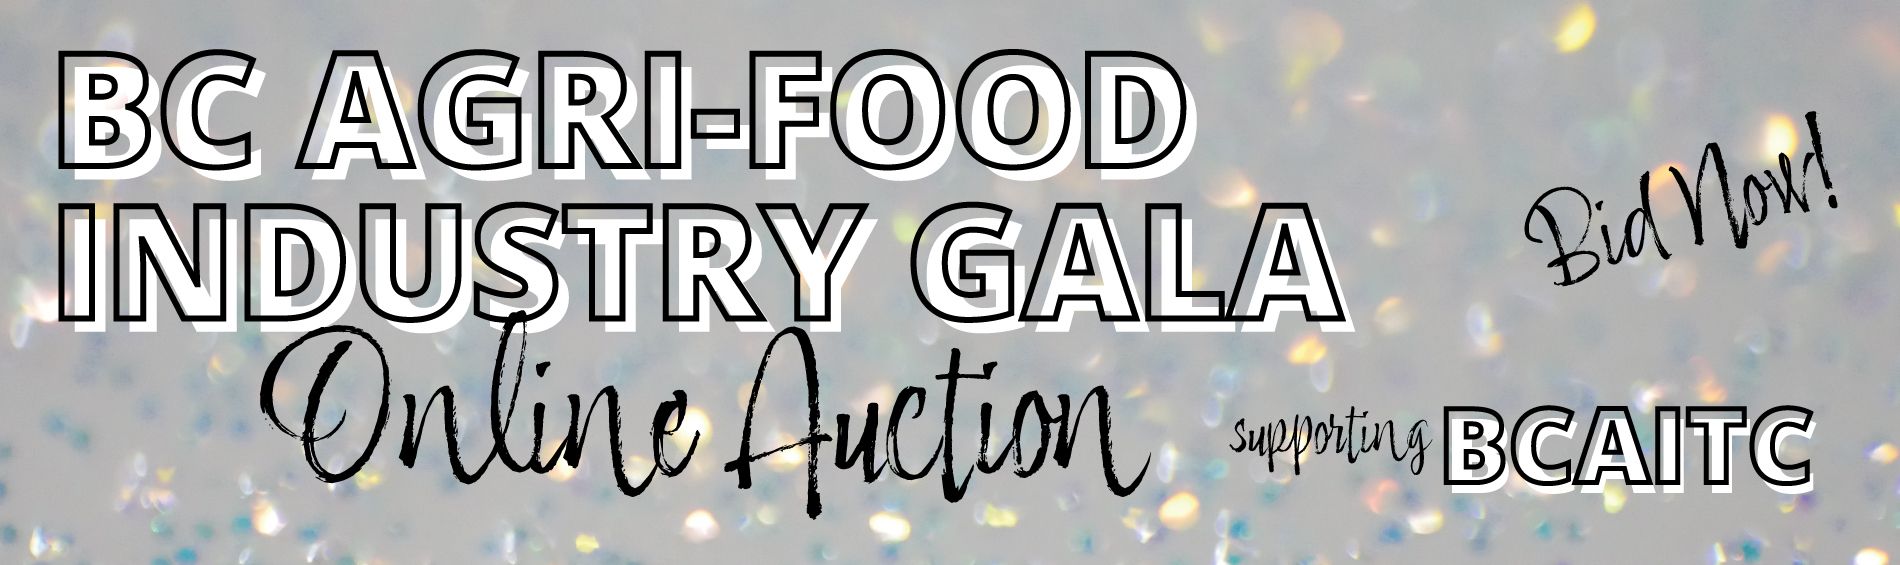 BC Agri-Food Industry Gala Online Auction